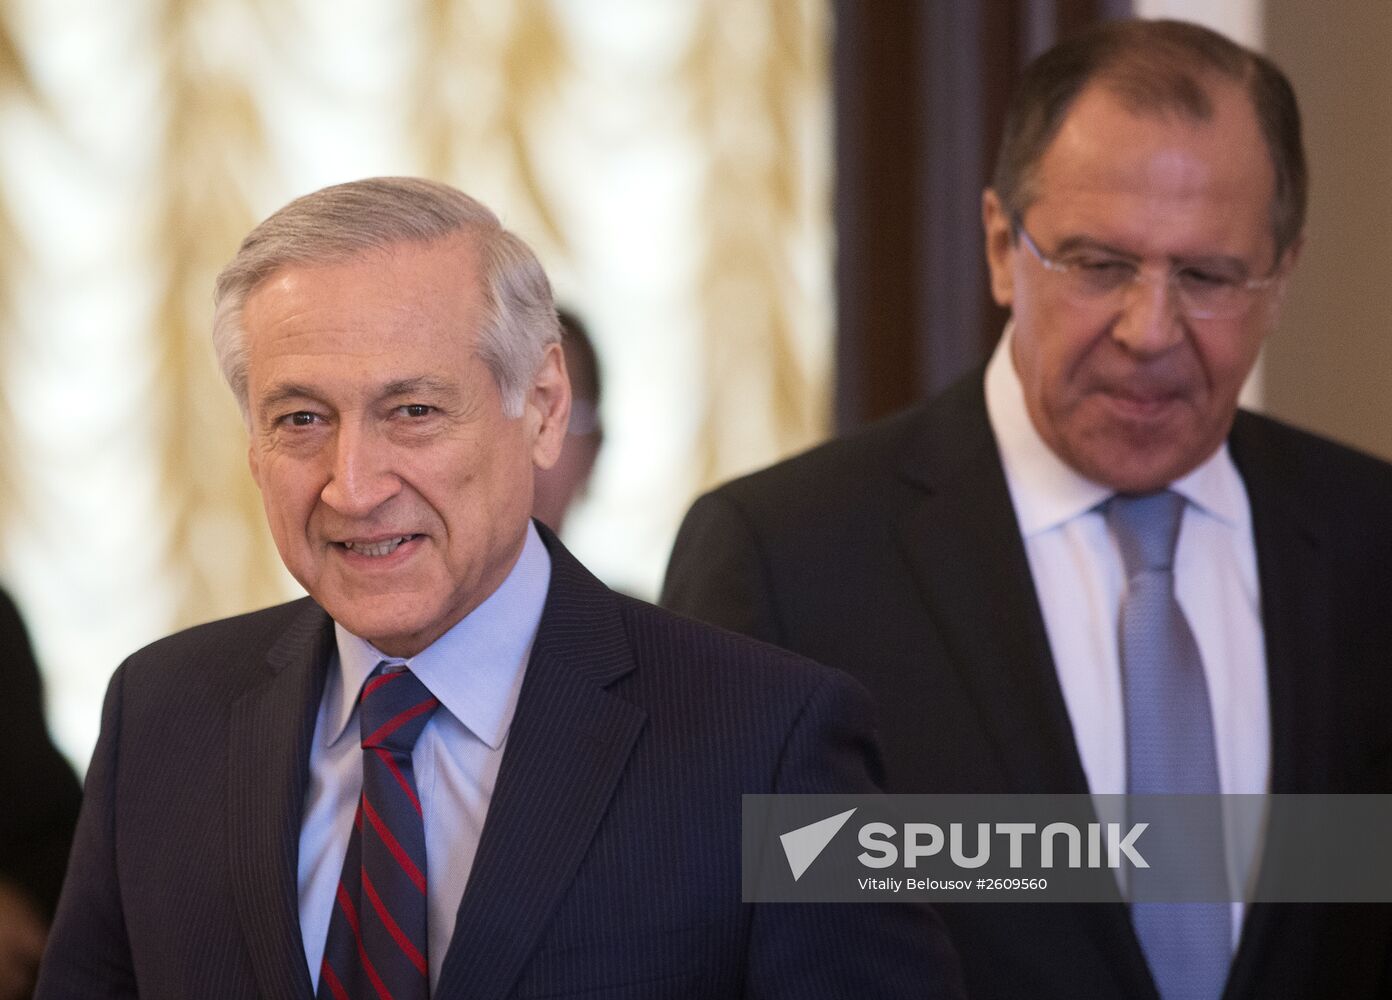 Russian Foreign Minister Sergei Lavrov meets with his Chilean counterpart Heraldo Munoz